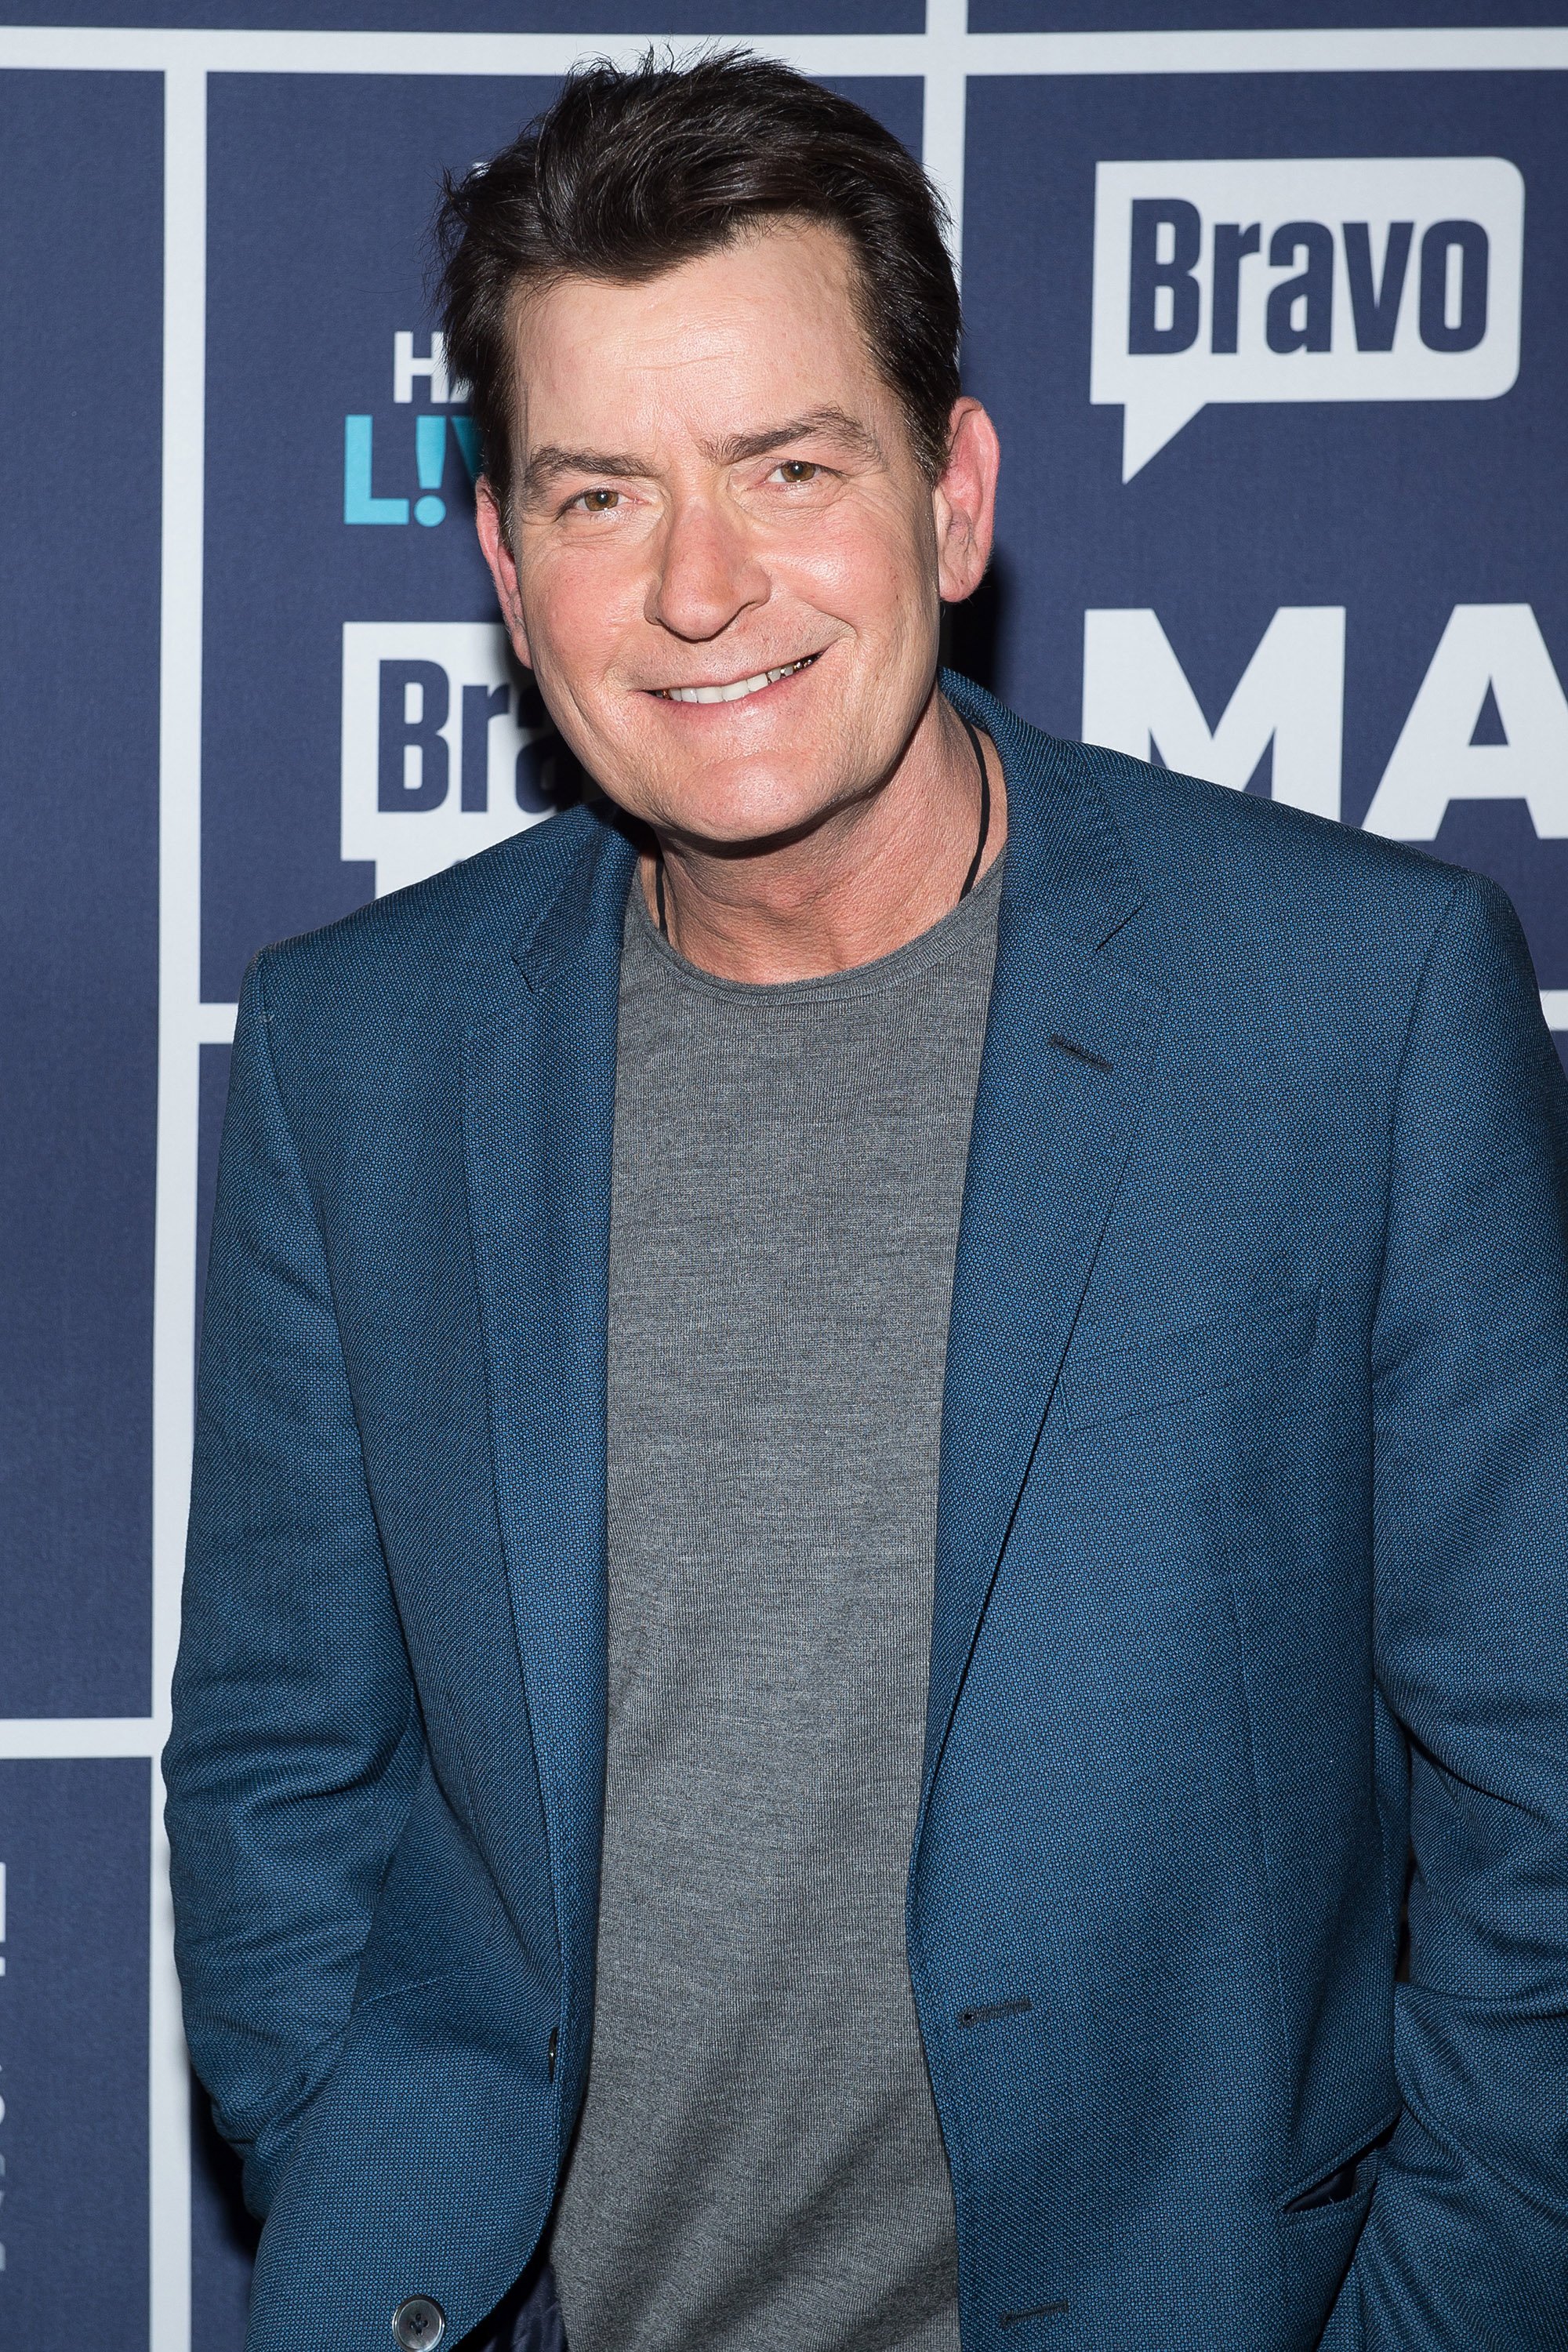 Charlie Sheen at "Watch What Happens Live with Andy Cohen" | Source: Getty Images